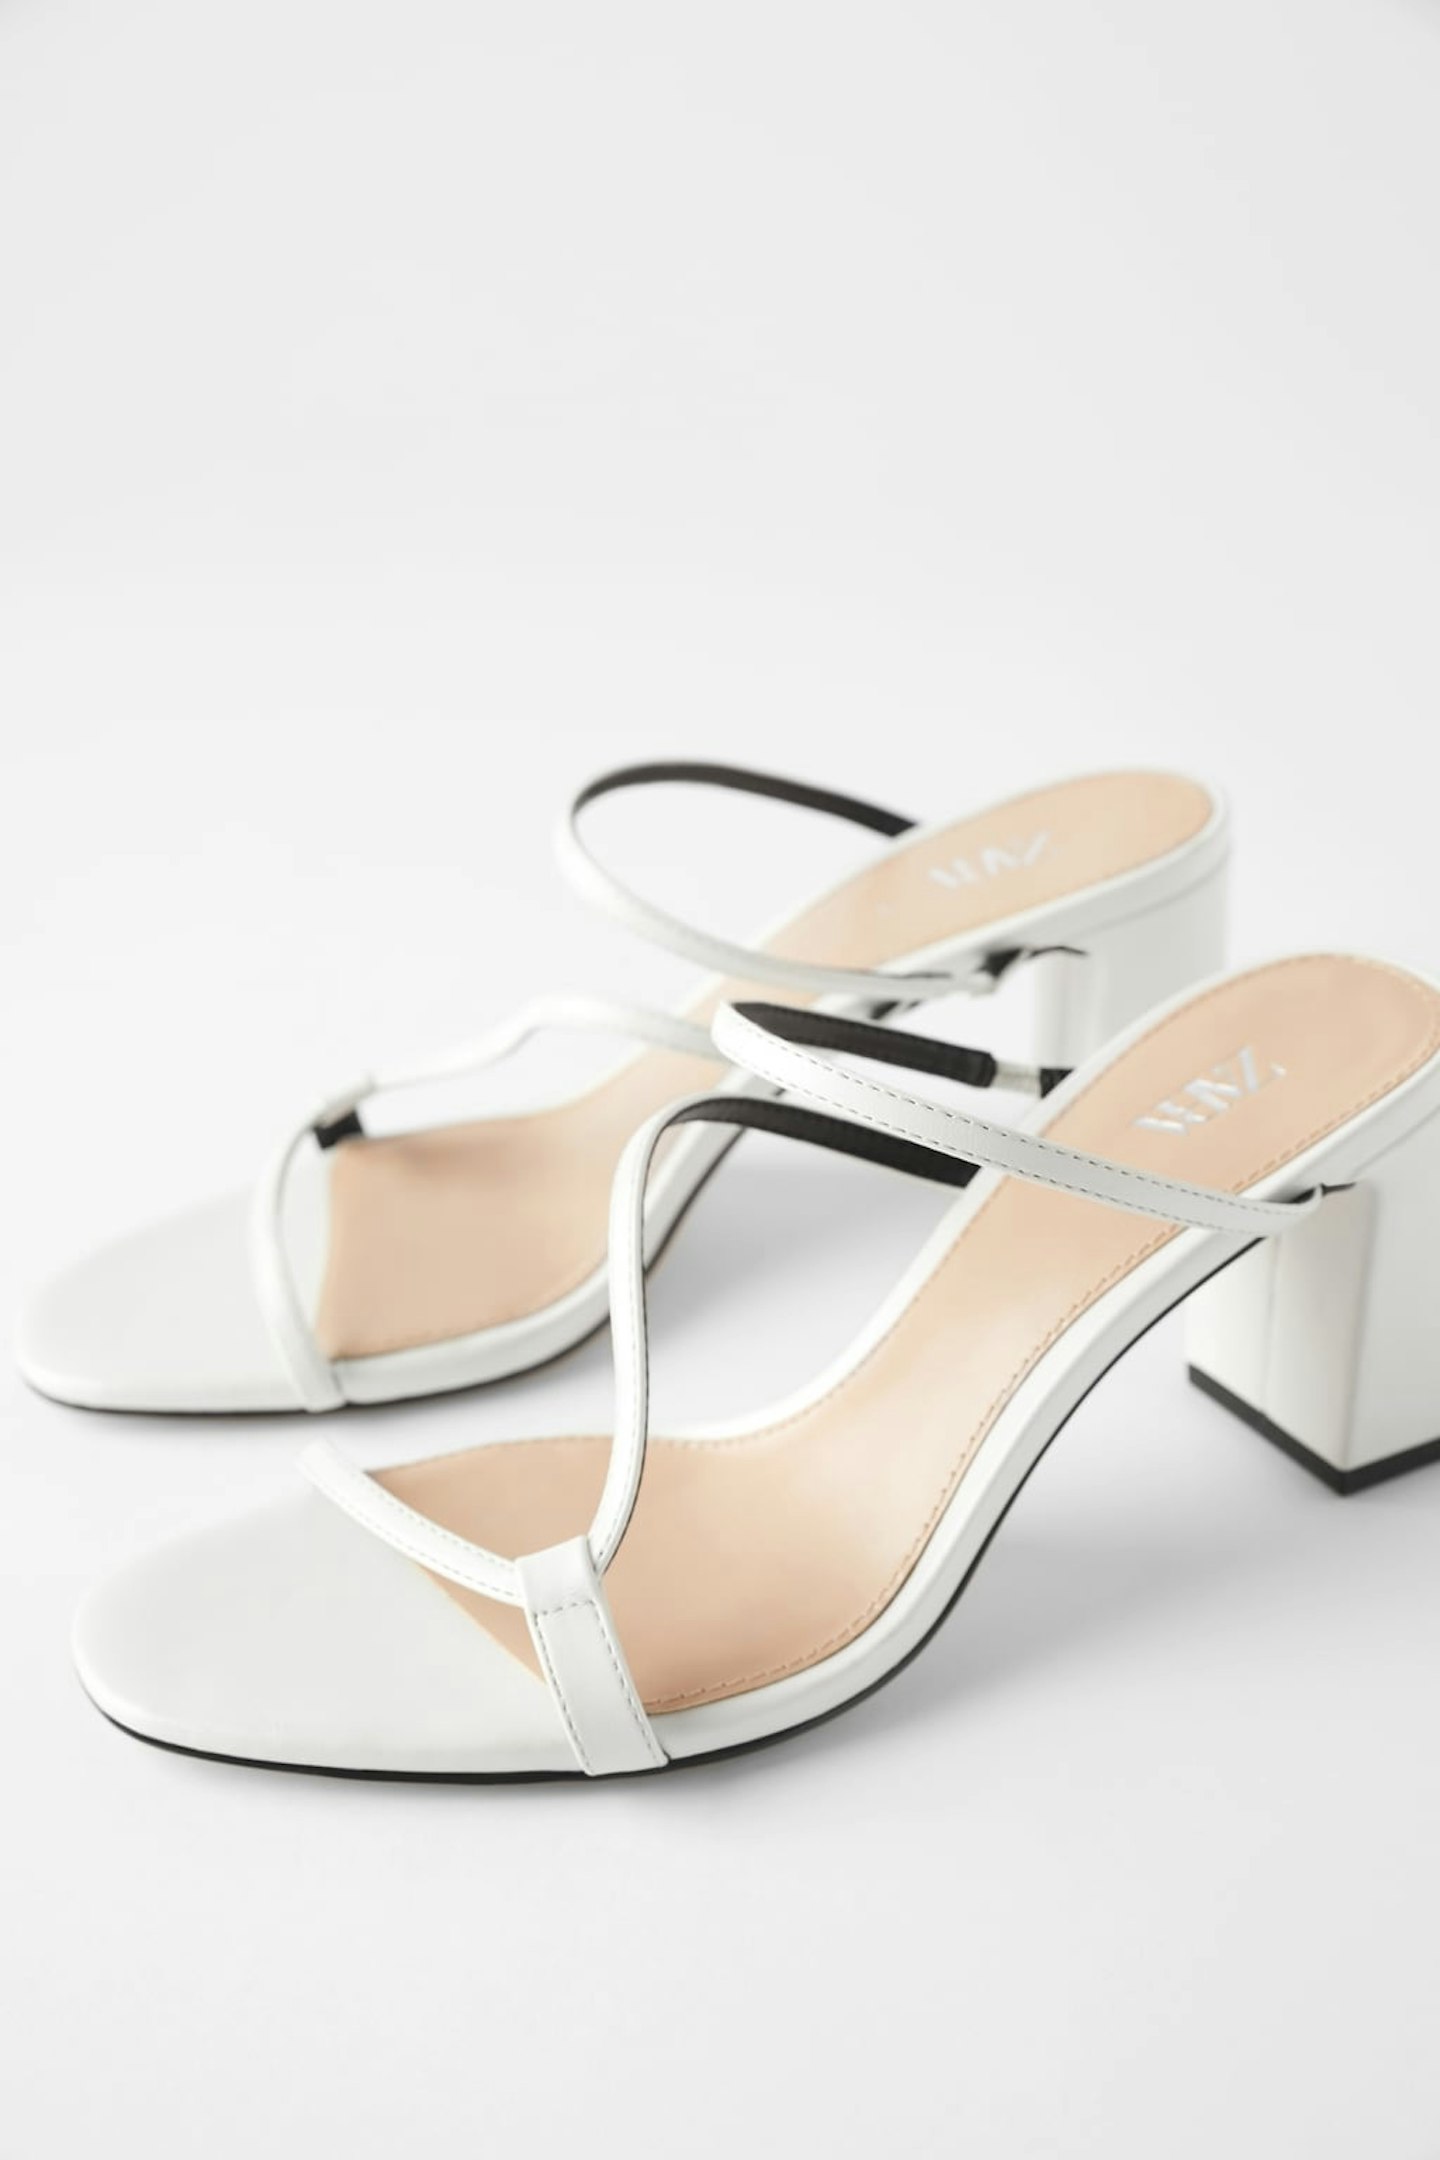 Mid-Heel Mules With Asymmetric Straps, £29.99